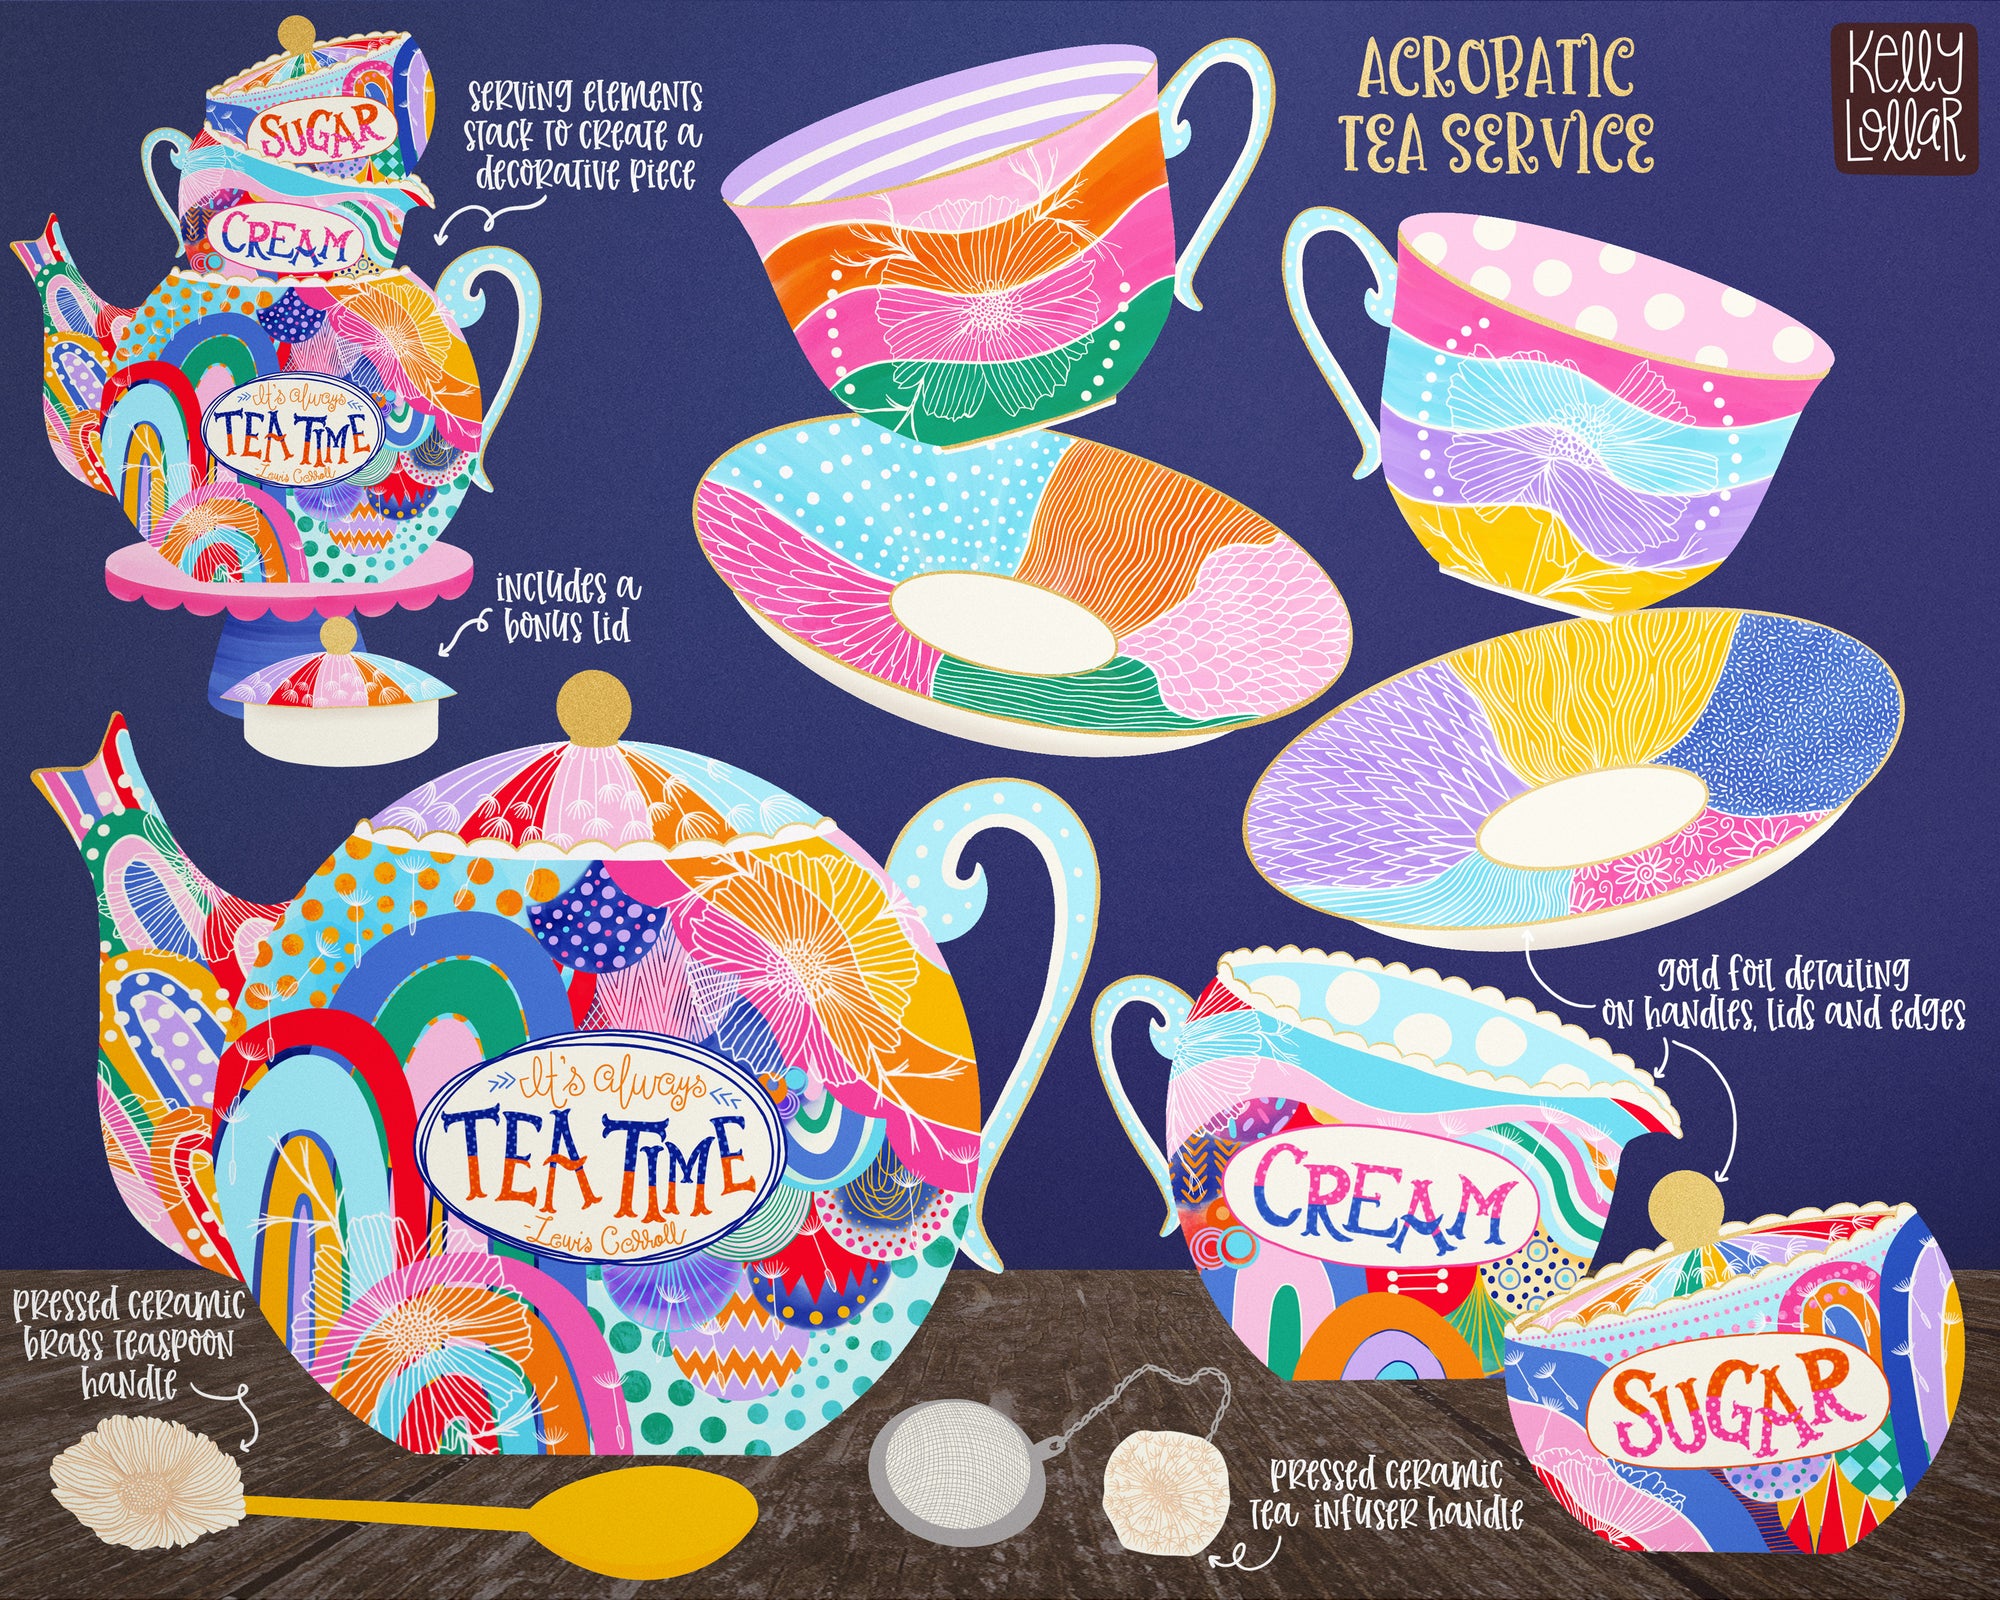 MATS Creating Collections for Home Decor Curiouser & Curiouser Tea Service by Kelly Lollar